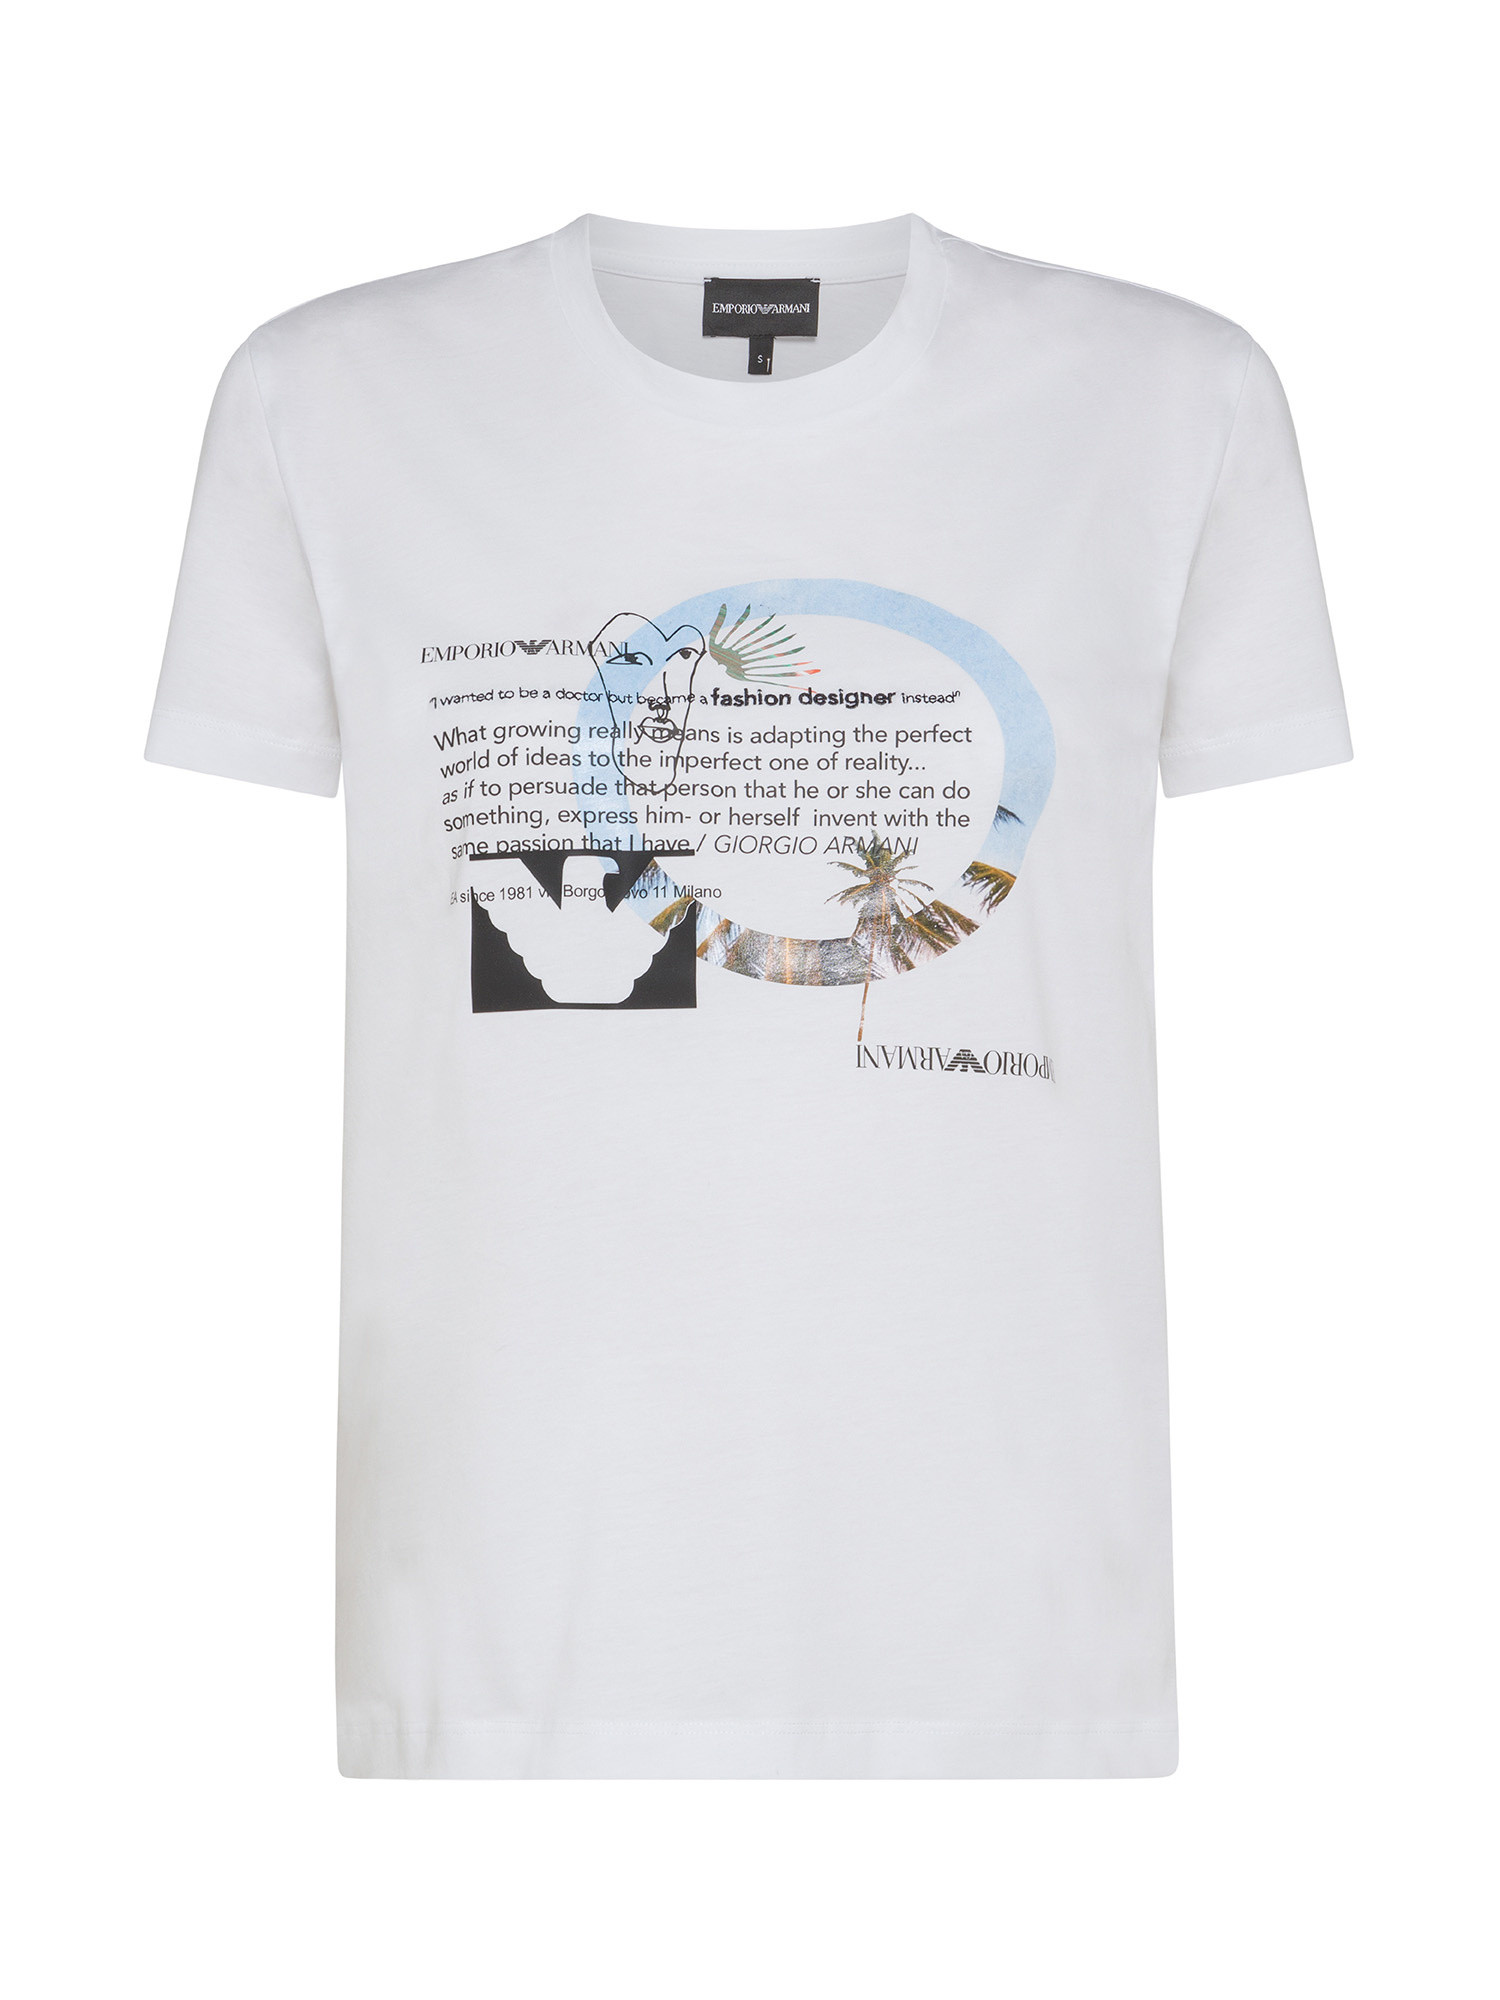 Emporio Armani - Cotton T-shirt with print, White, large image number 0